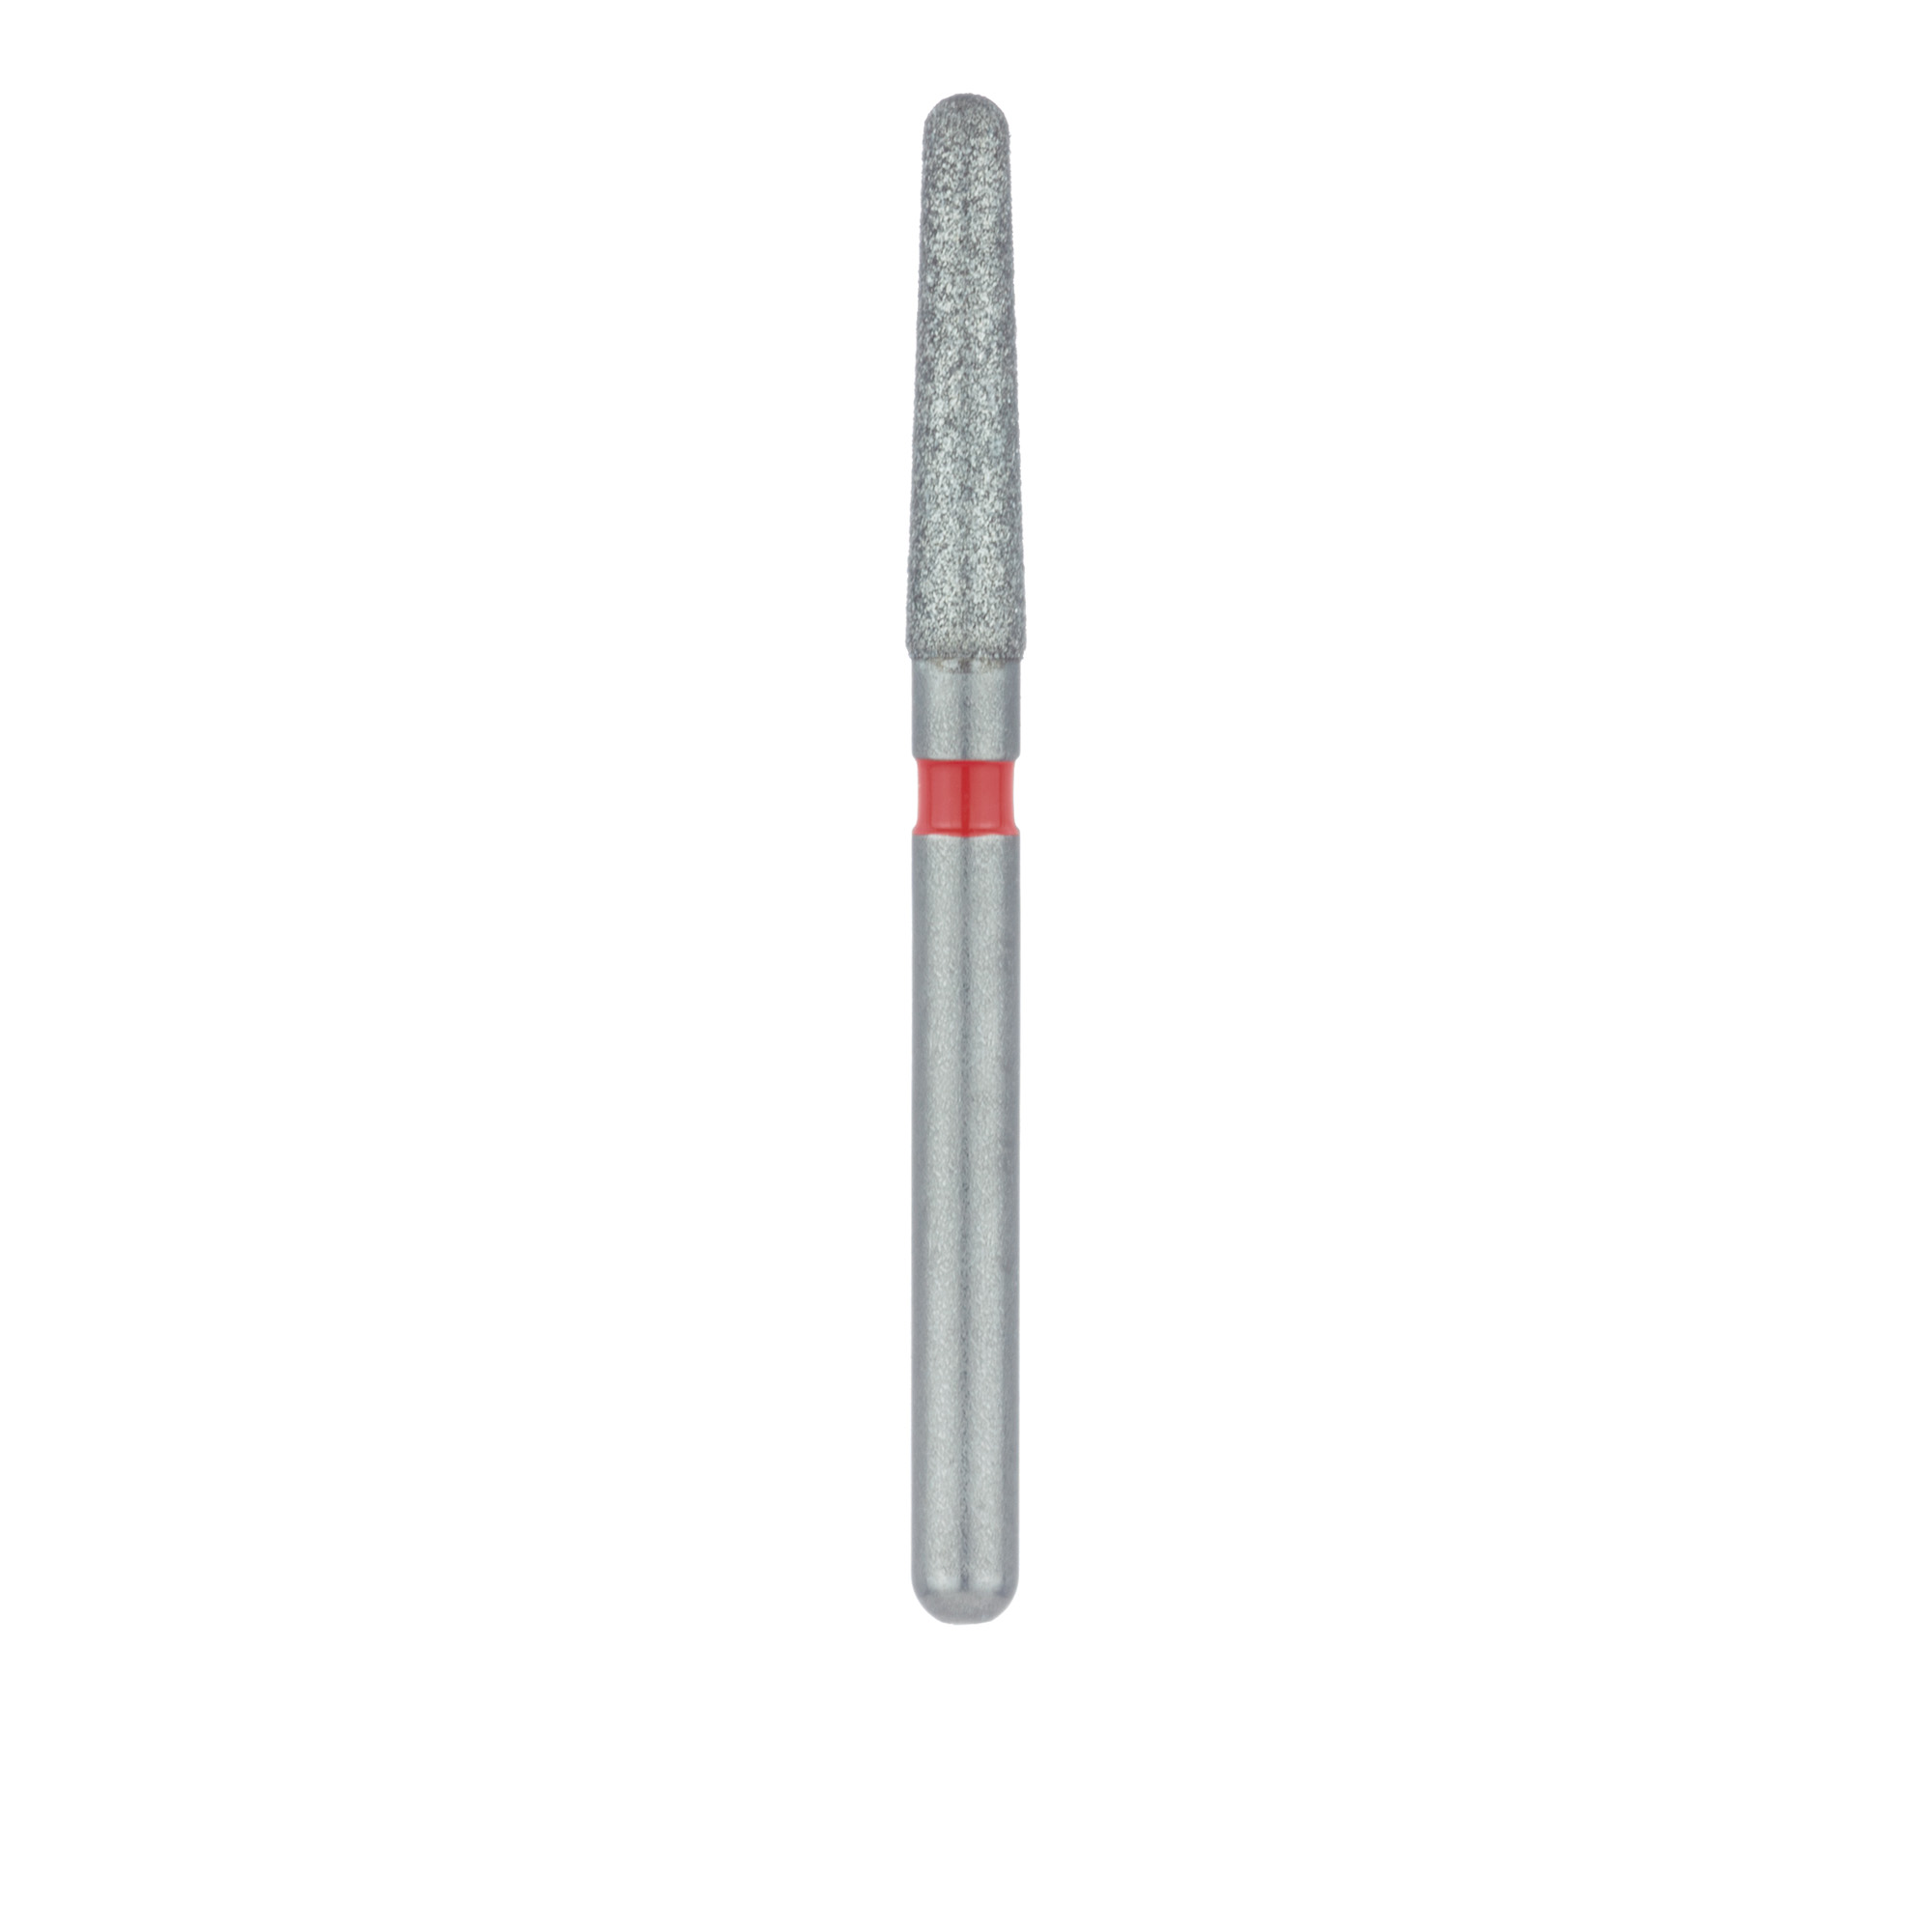 1118.7F Single-Use Diamond Bur, Sterile, 25 Pack, 1.8mm Ø, Tapered, Round End, 7mm Working Length, Fine, FG